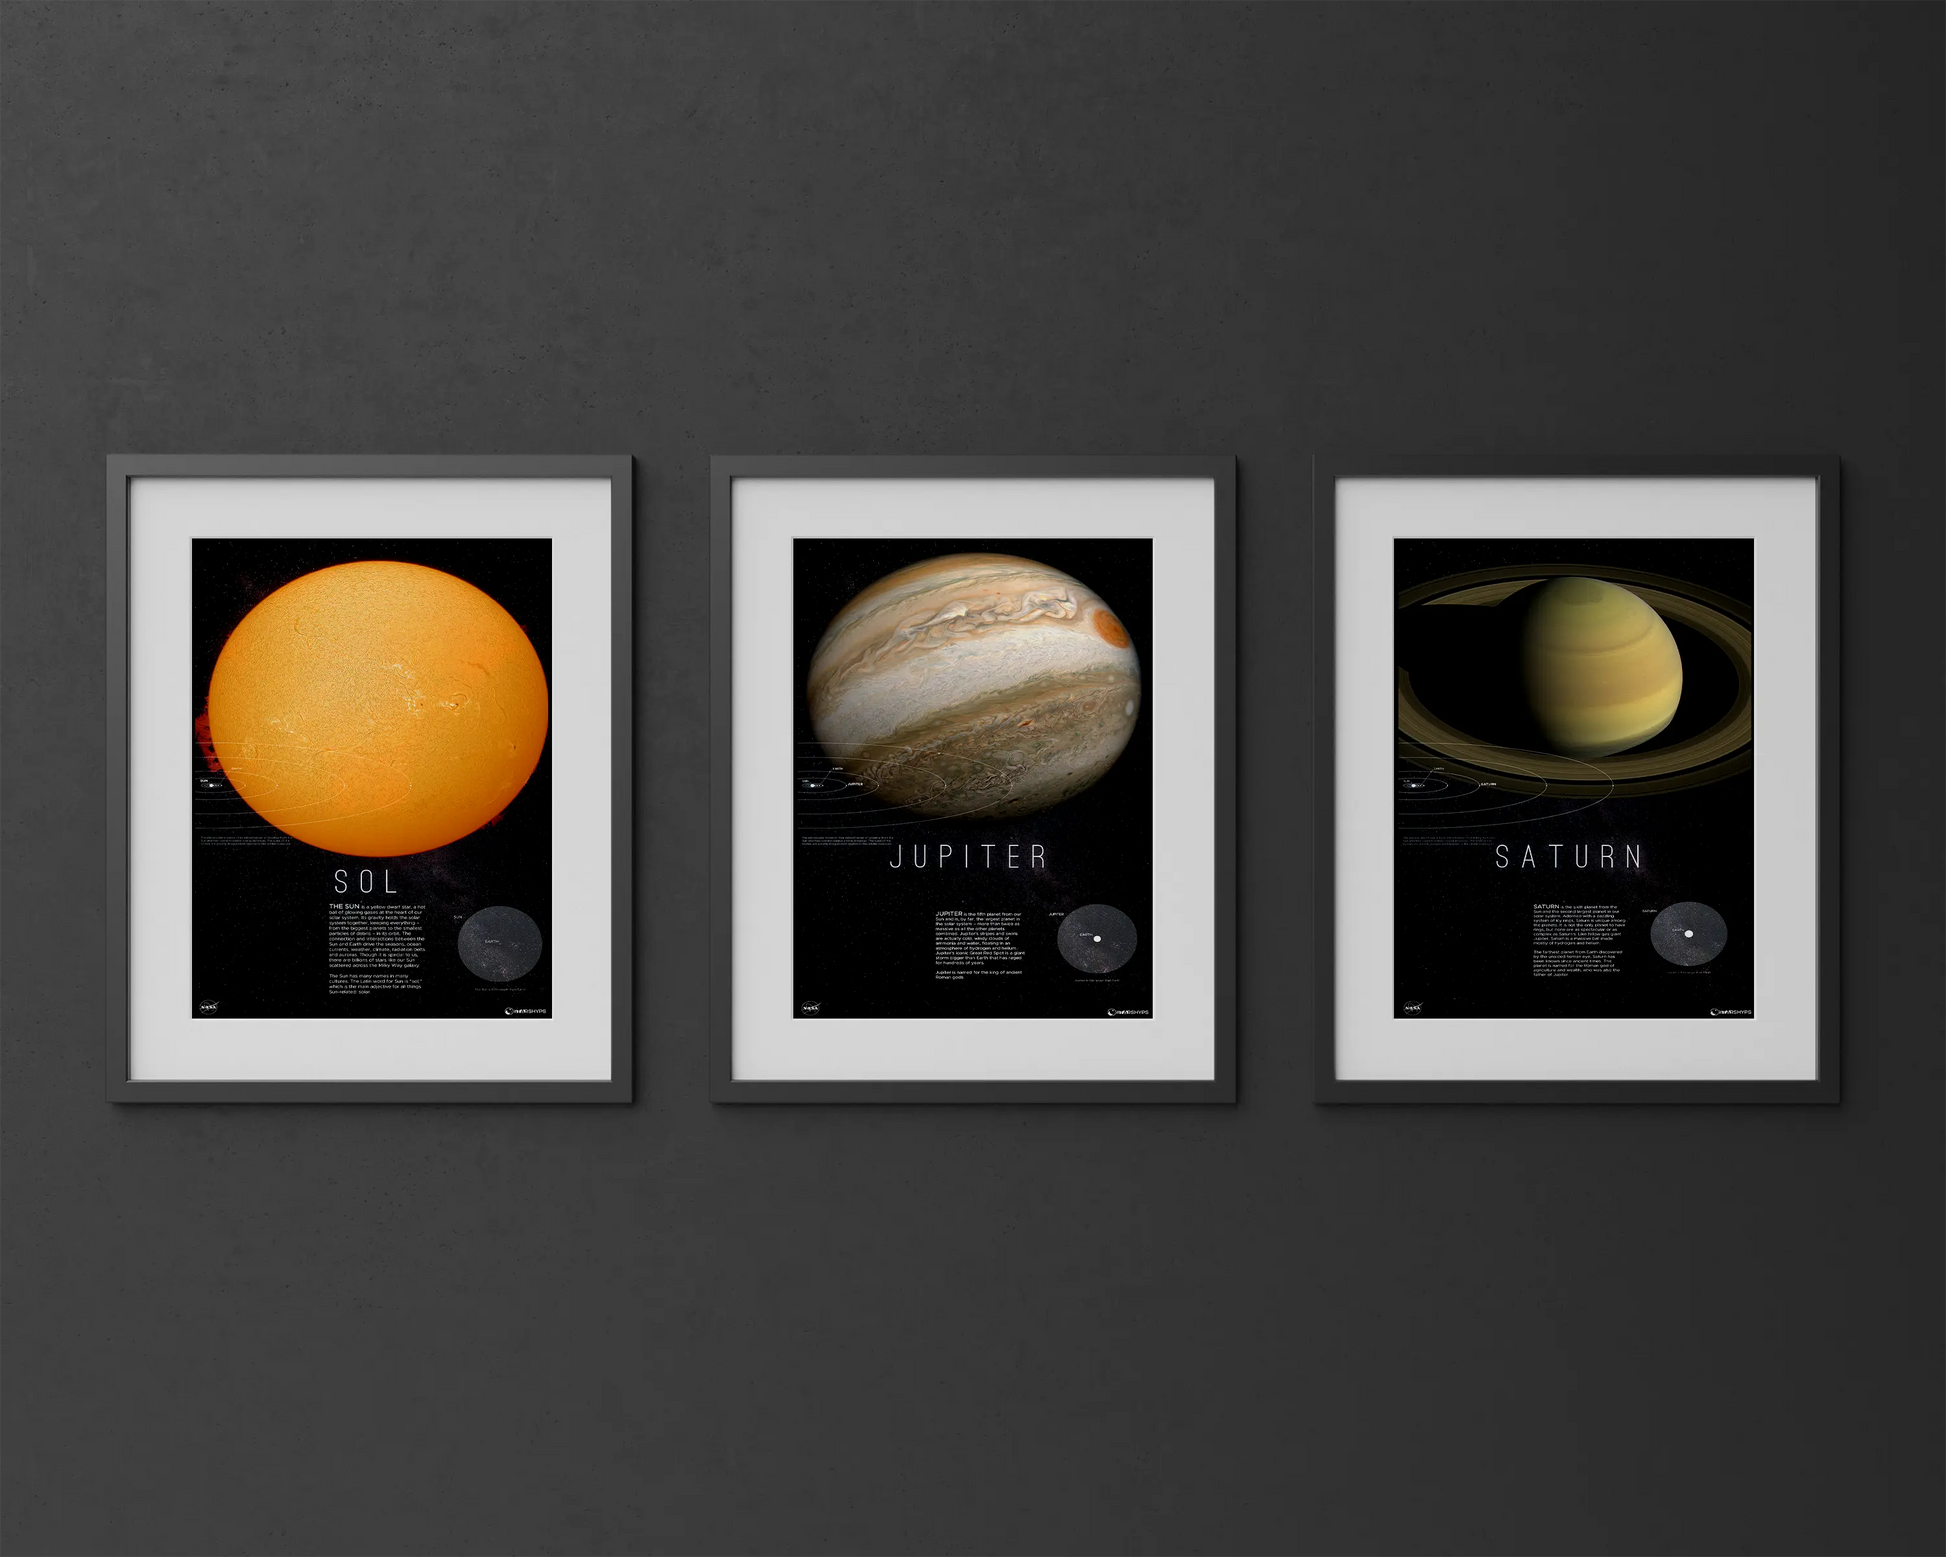 Venus | Sun | Jupiter | Saturn |Rocket Blueprint Posters | The image displays three framed posters on a dark background, each featuring an image and description of the Sun, Jupiter, and Saturn, with their names prominently labeled below the images.